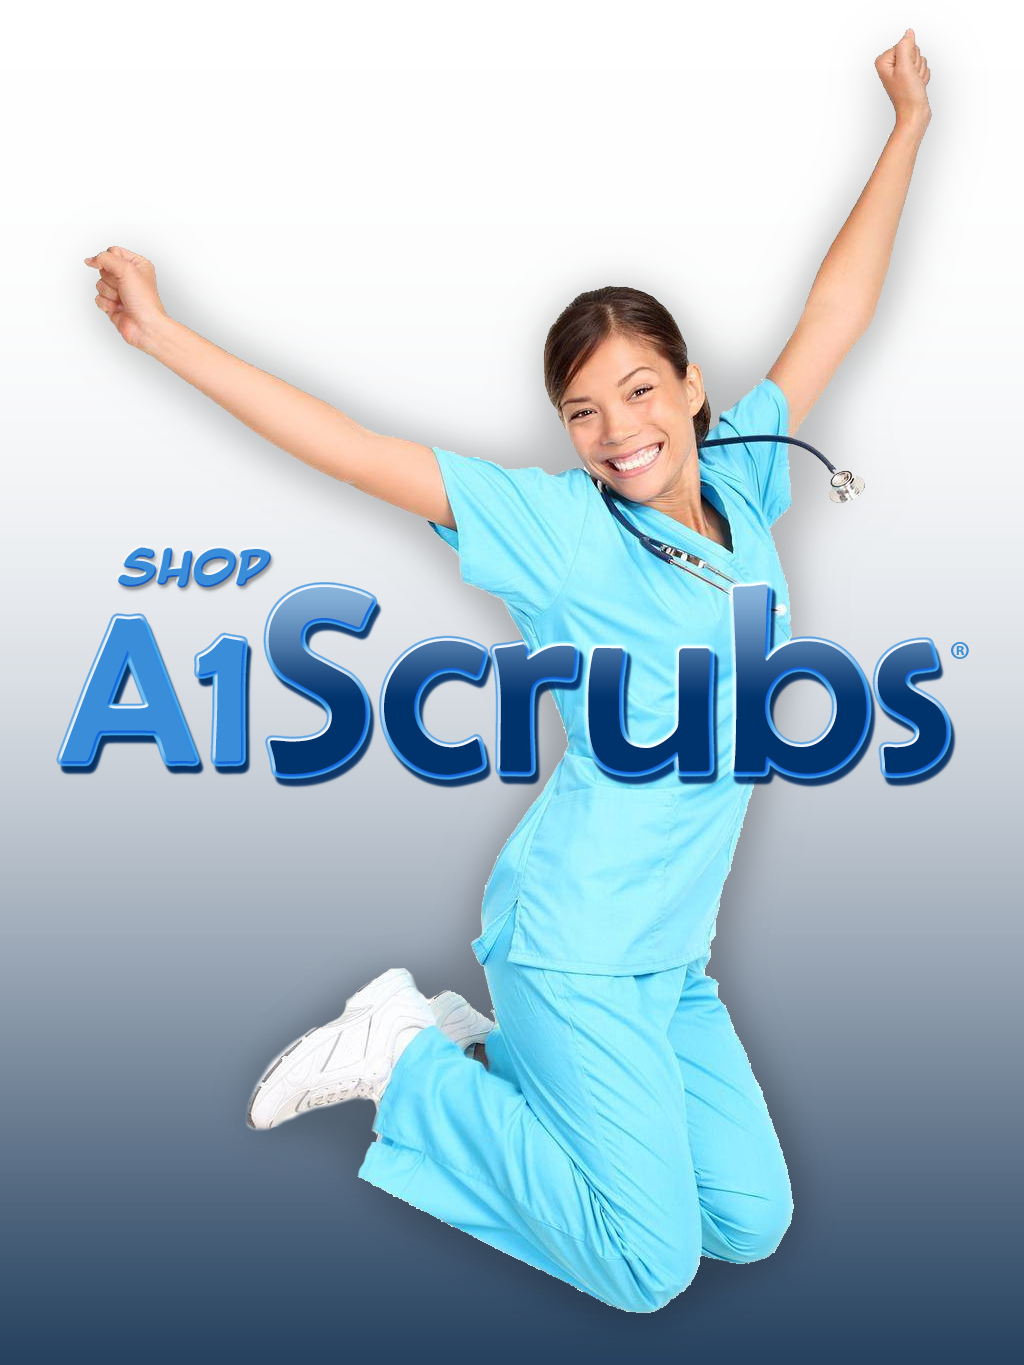 Shop A1Scrubs.com since 1997 for the best quality nursing scrubs and medical uniforms online. Great looking scrubs for you or your entire staff, medical practice or dental office.